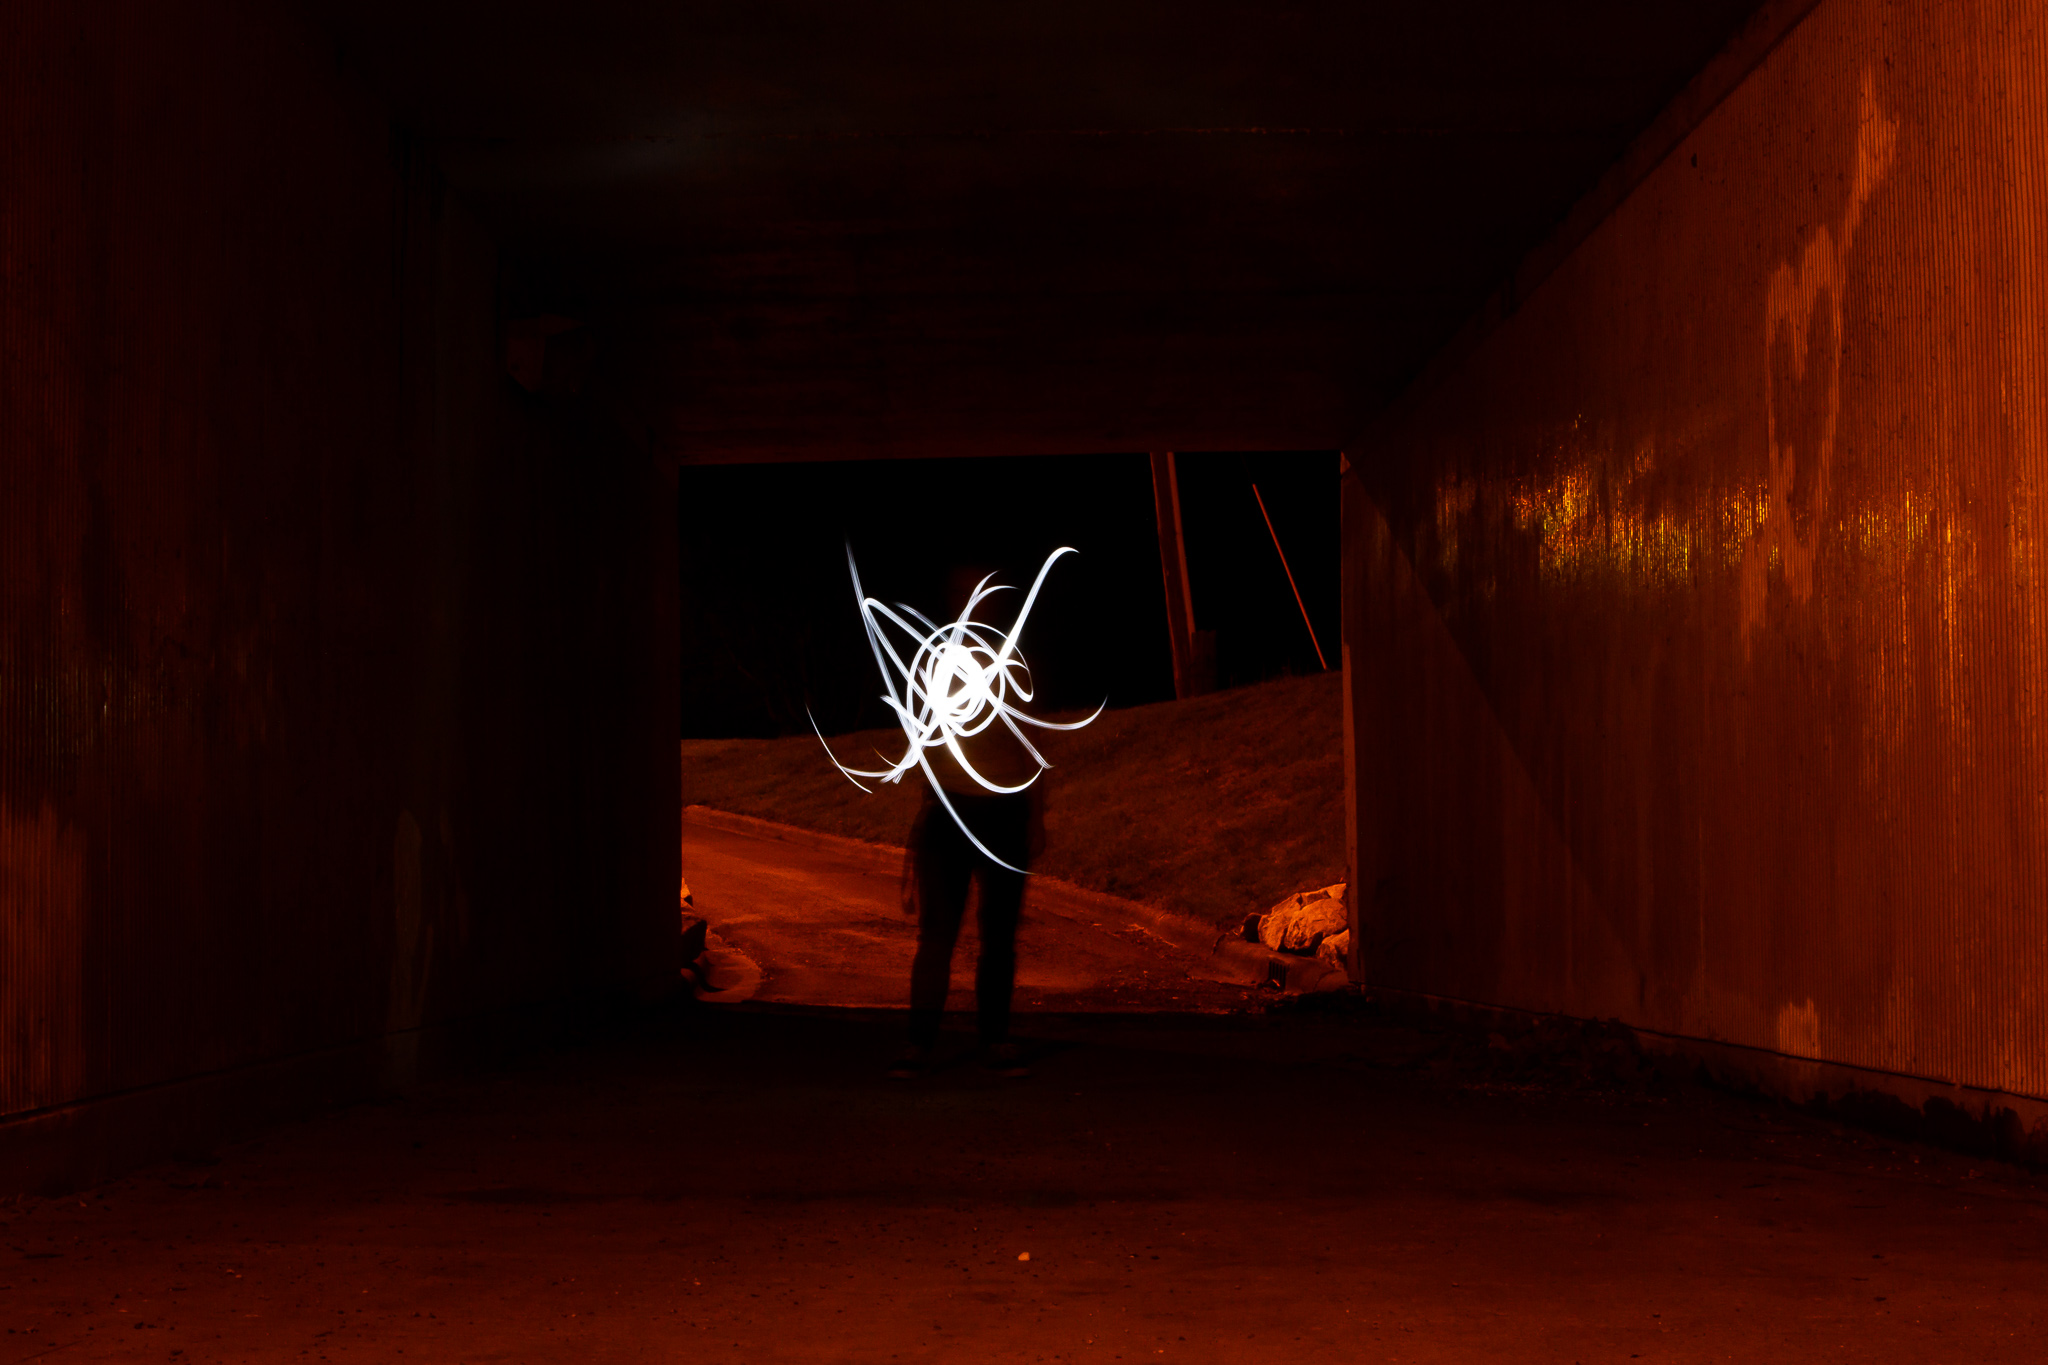 A subject stands at the end of a tunnel, but their head is covered by trails of white light in a scribble pattern